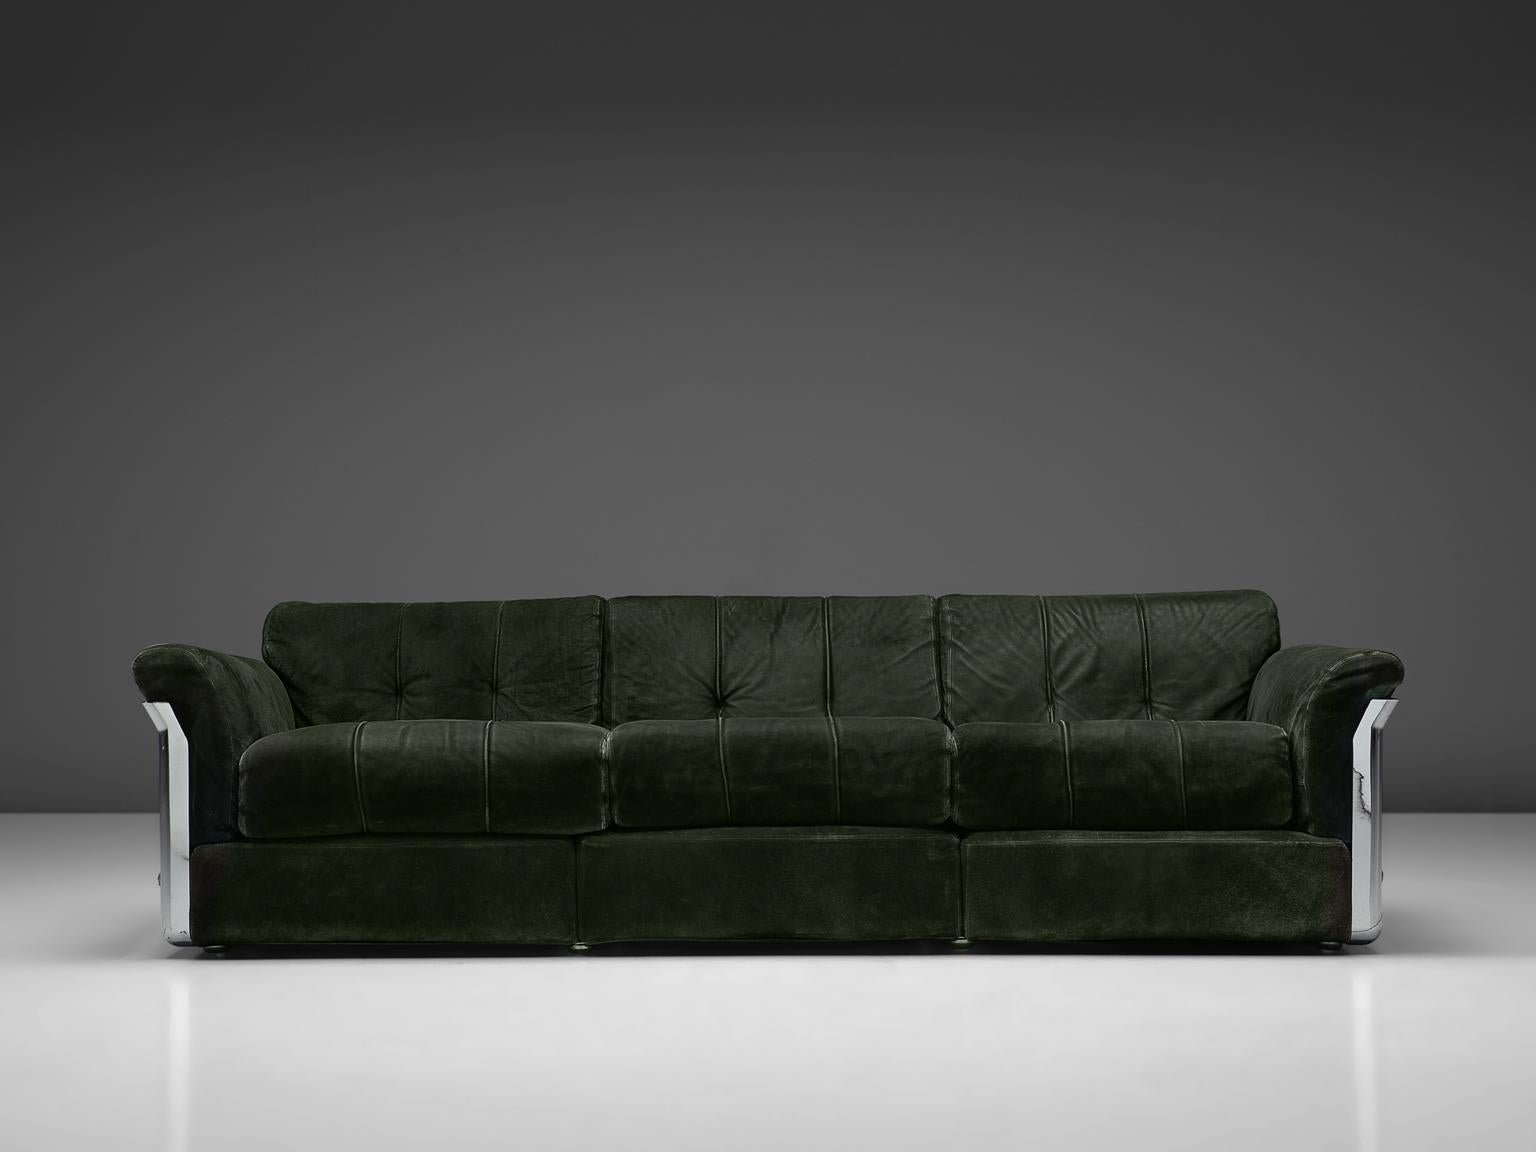 Vittorio Introini for Saporiti, three-seat sofa, navy suede and chrome, Italy, 1969.

This sofa s is designed by Vittorio Introini and produced by Saporiti in chrome and dark green upholstery. The piece features a steel shell with thick,